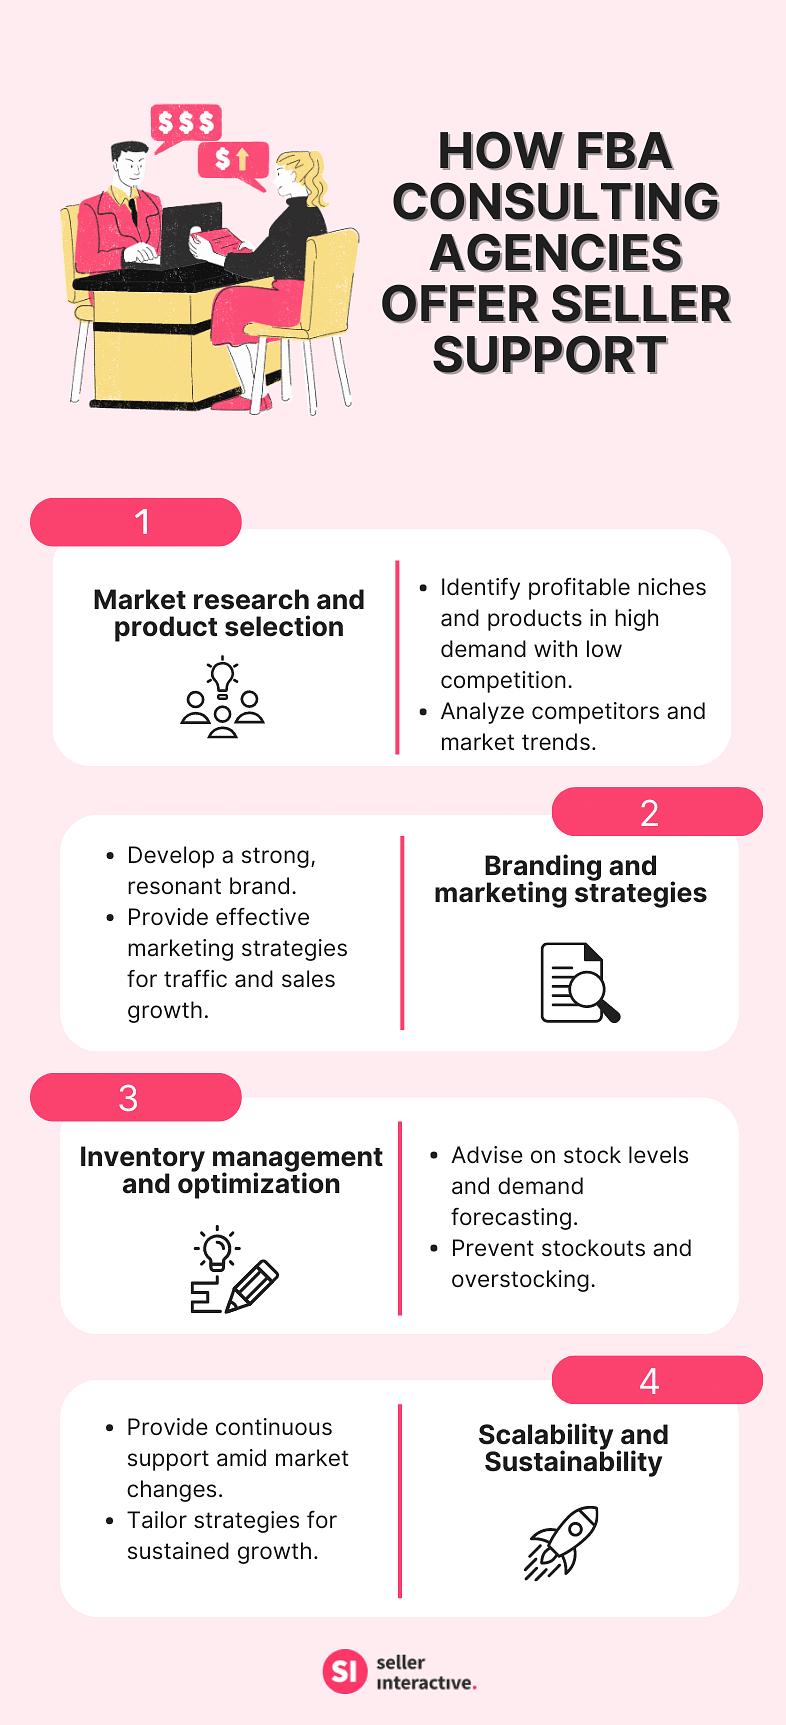 an infographic about how amazon consulting agencies help FBA sellers